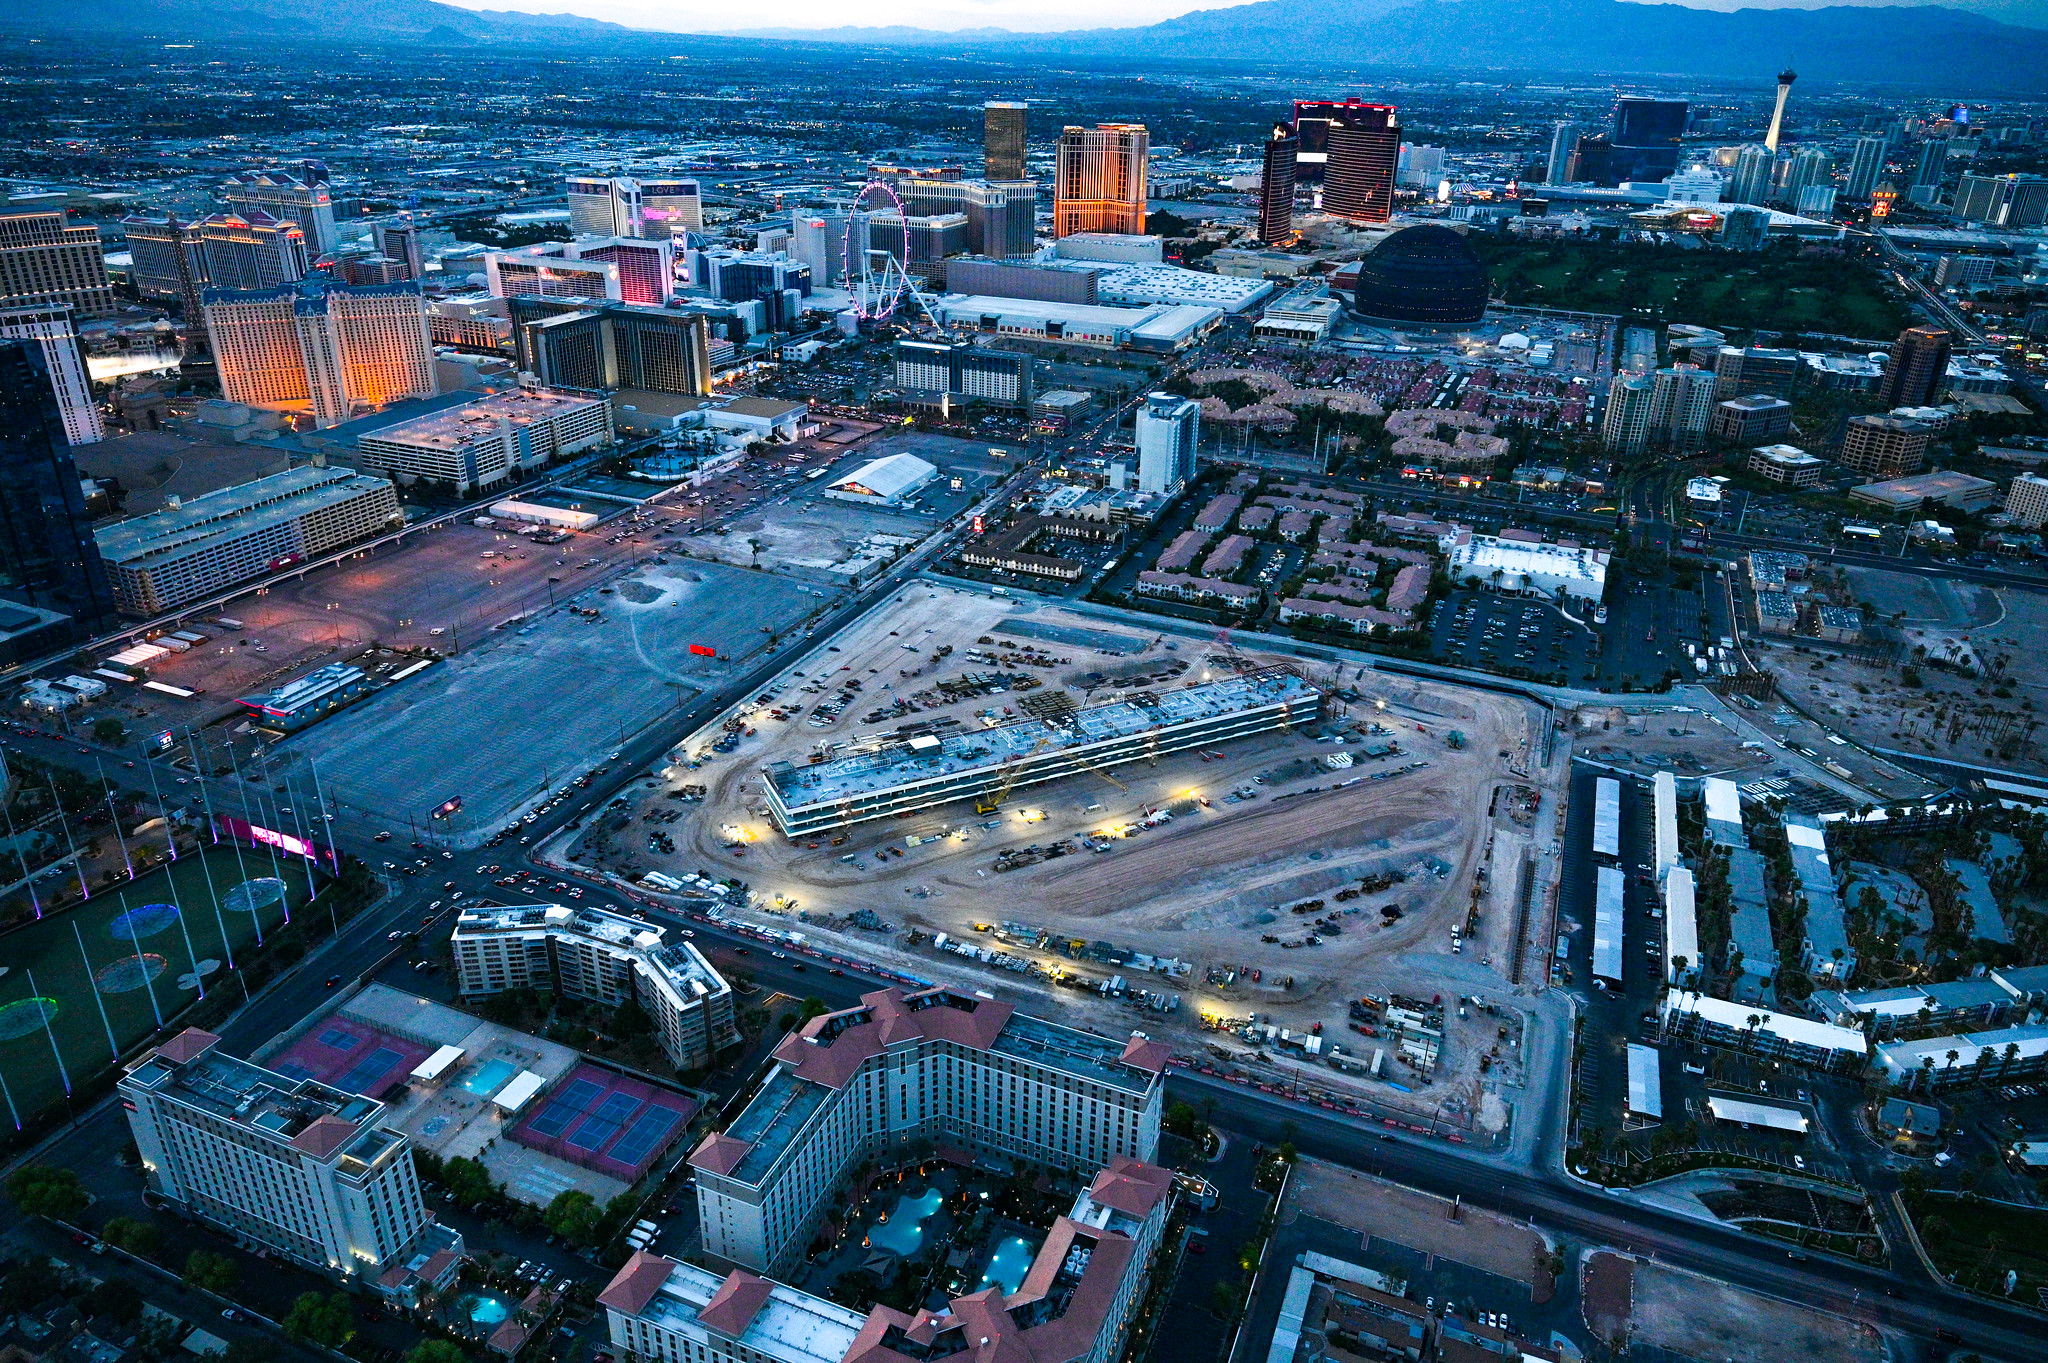 LVSportsBizs Exclusive Tour Of F1 Paddock Project East Of Strip For Novembers Las Vegas Grand Prix Race